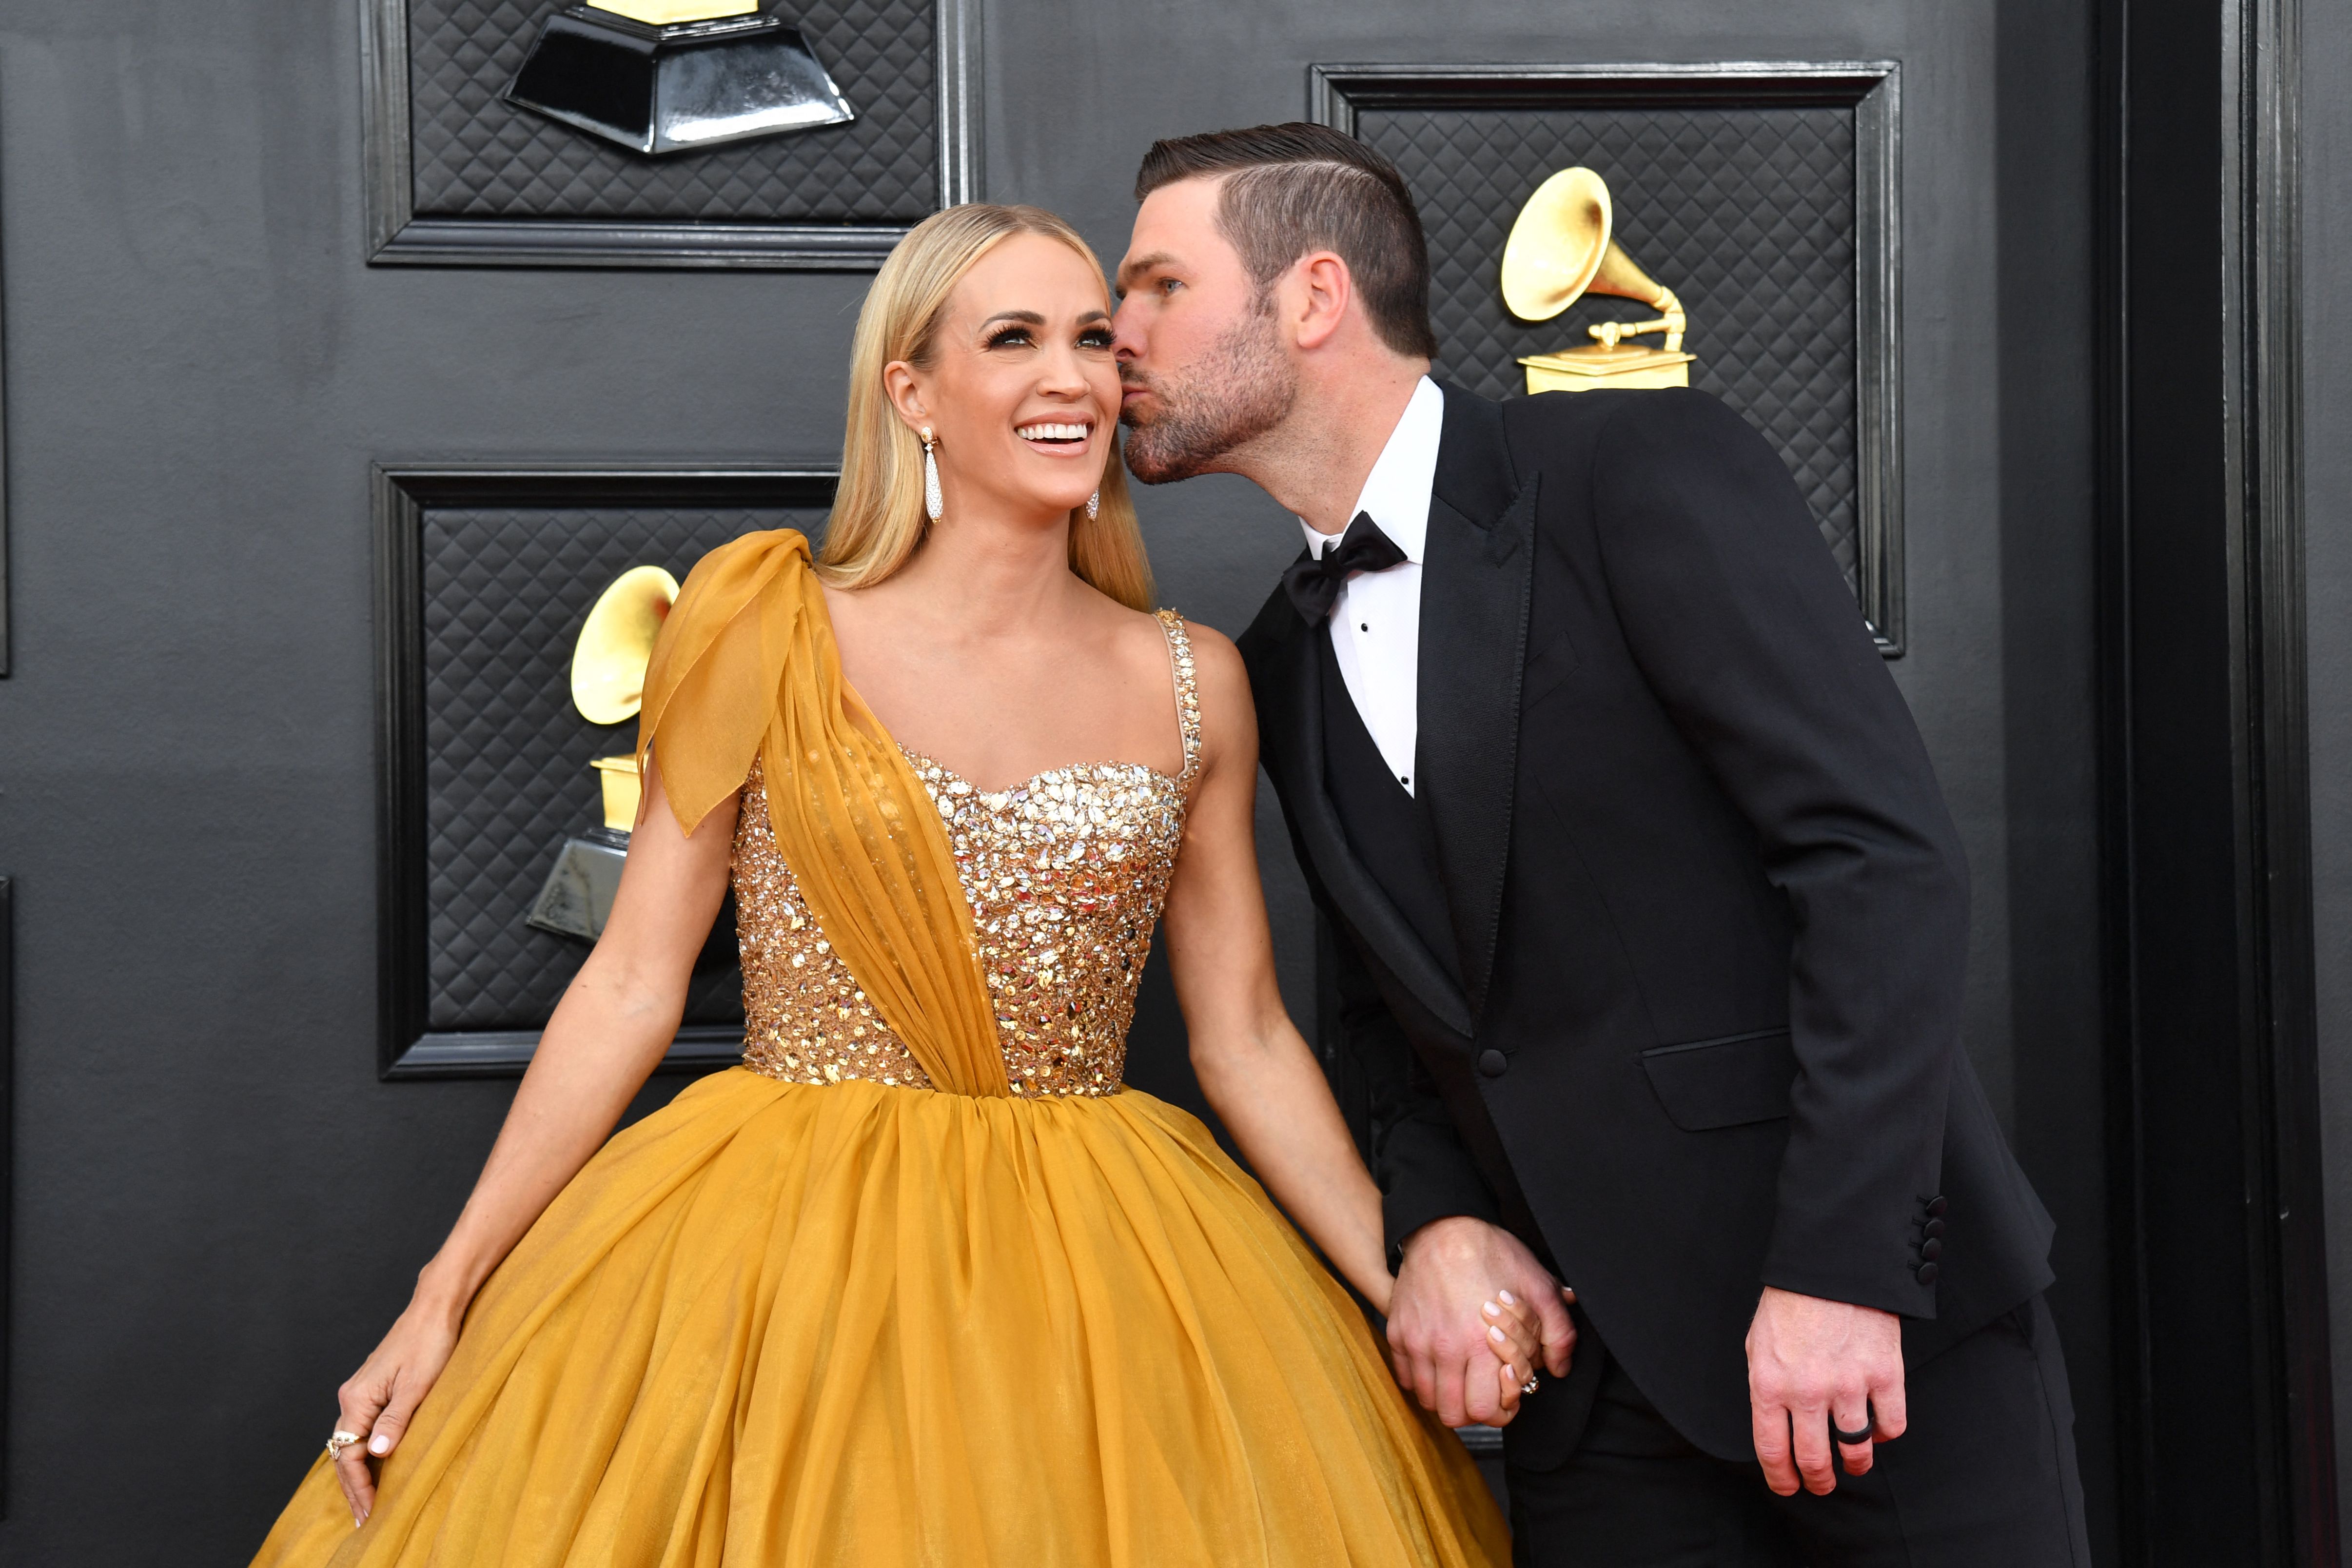 Carrie Underwood and Mike Fisher first encountered each other in 2008